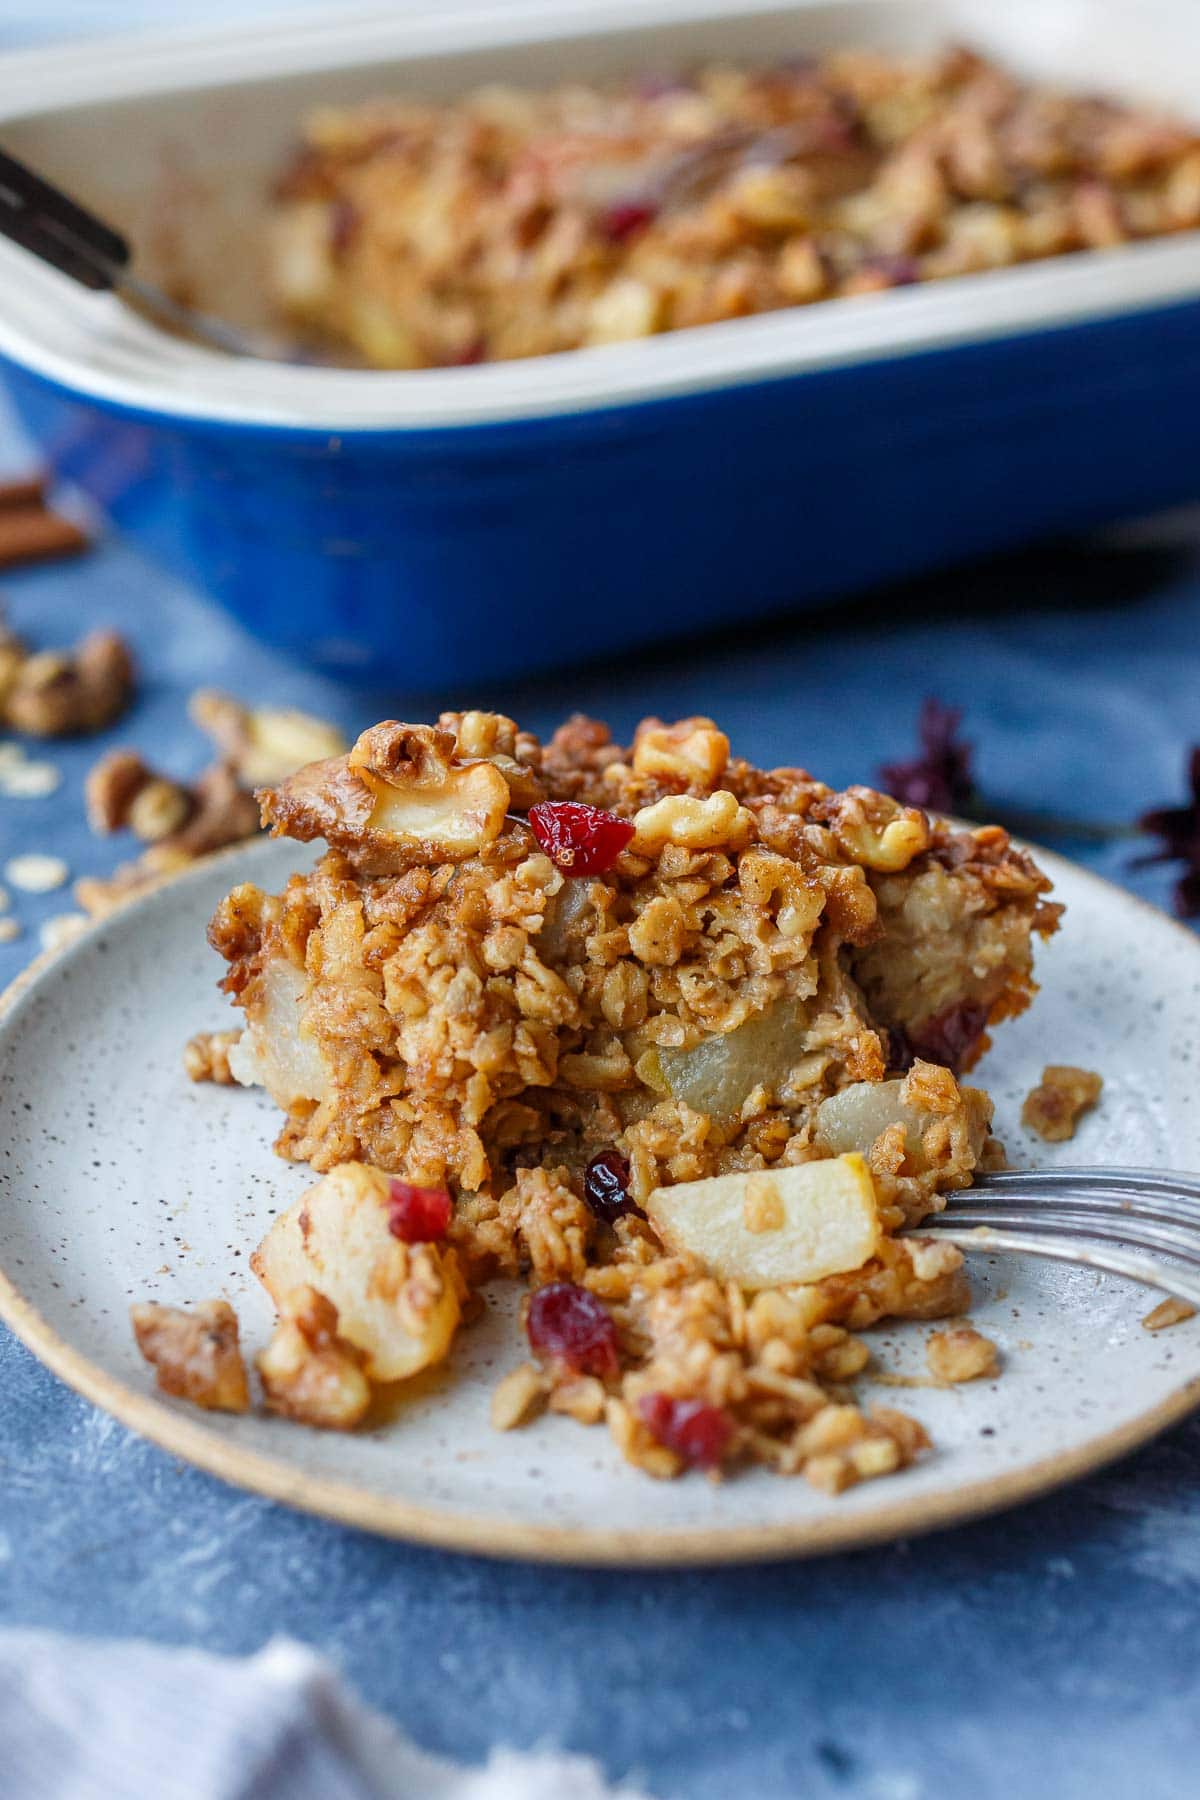 piece of baked oatmeal on plate with pears, dried cranberries, walnuts